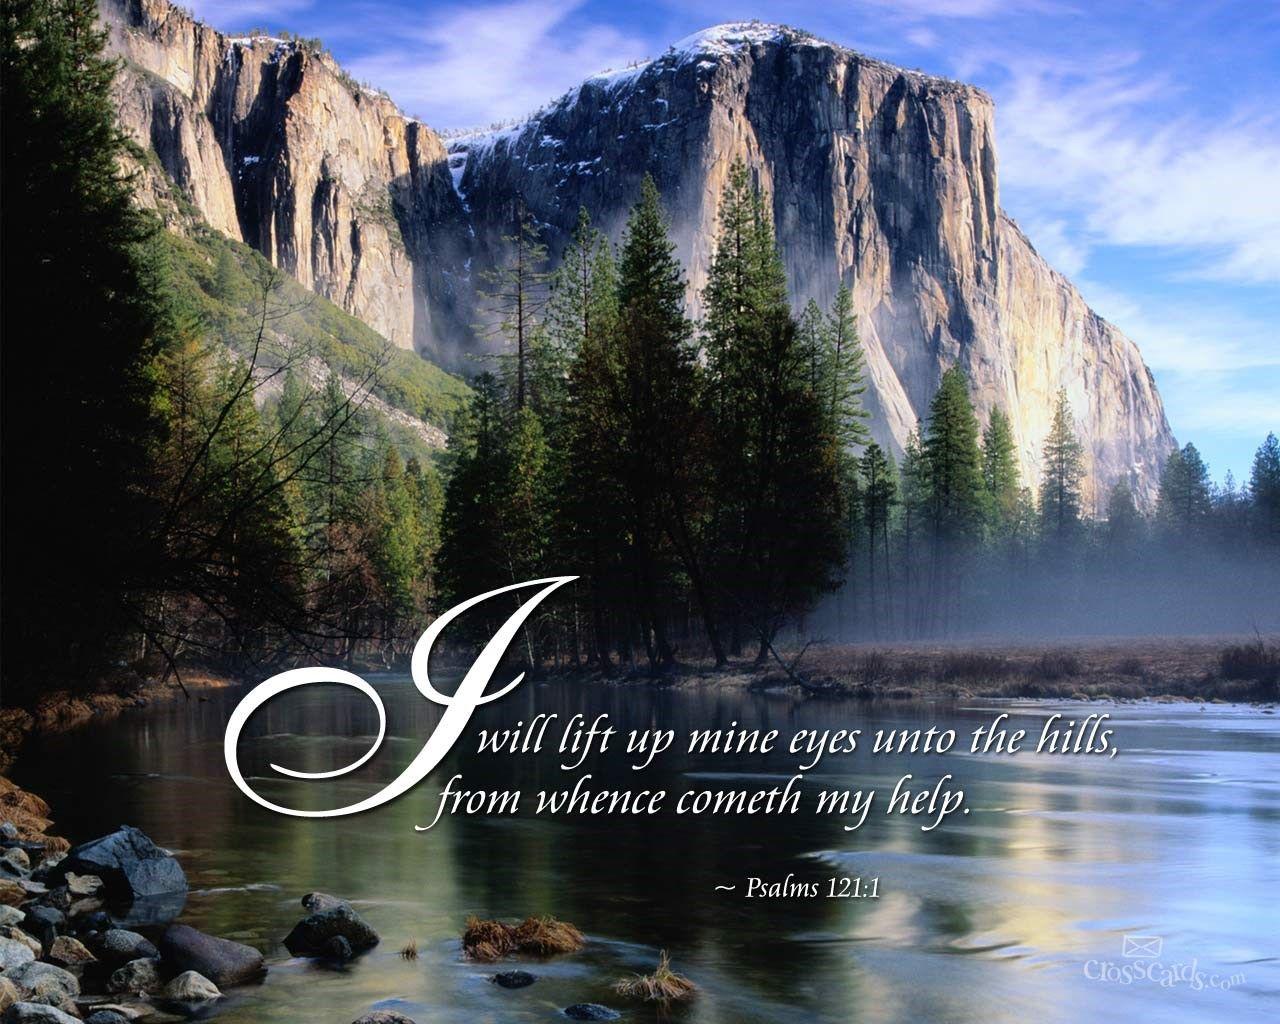 Psalm 121:1 Verses and Scripture Wallpaper for Phone or Computer